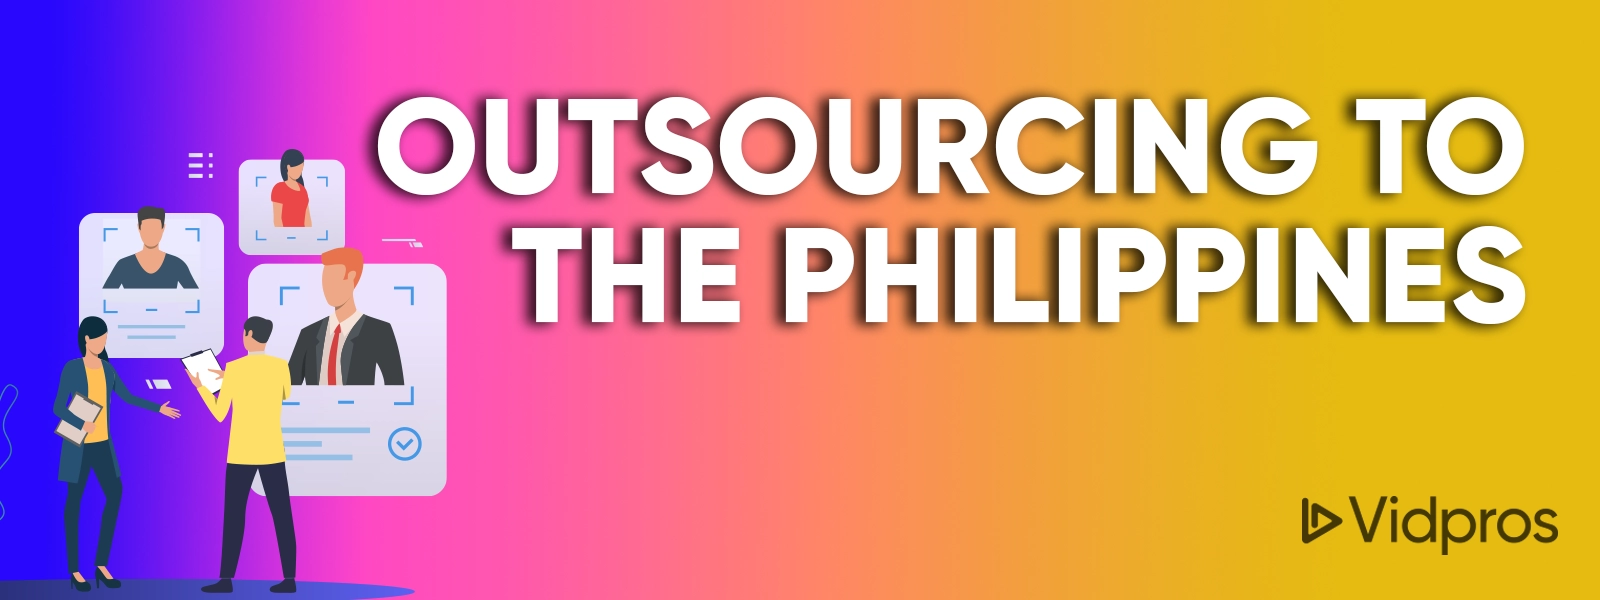 Outsourcing To The Philippines